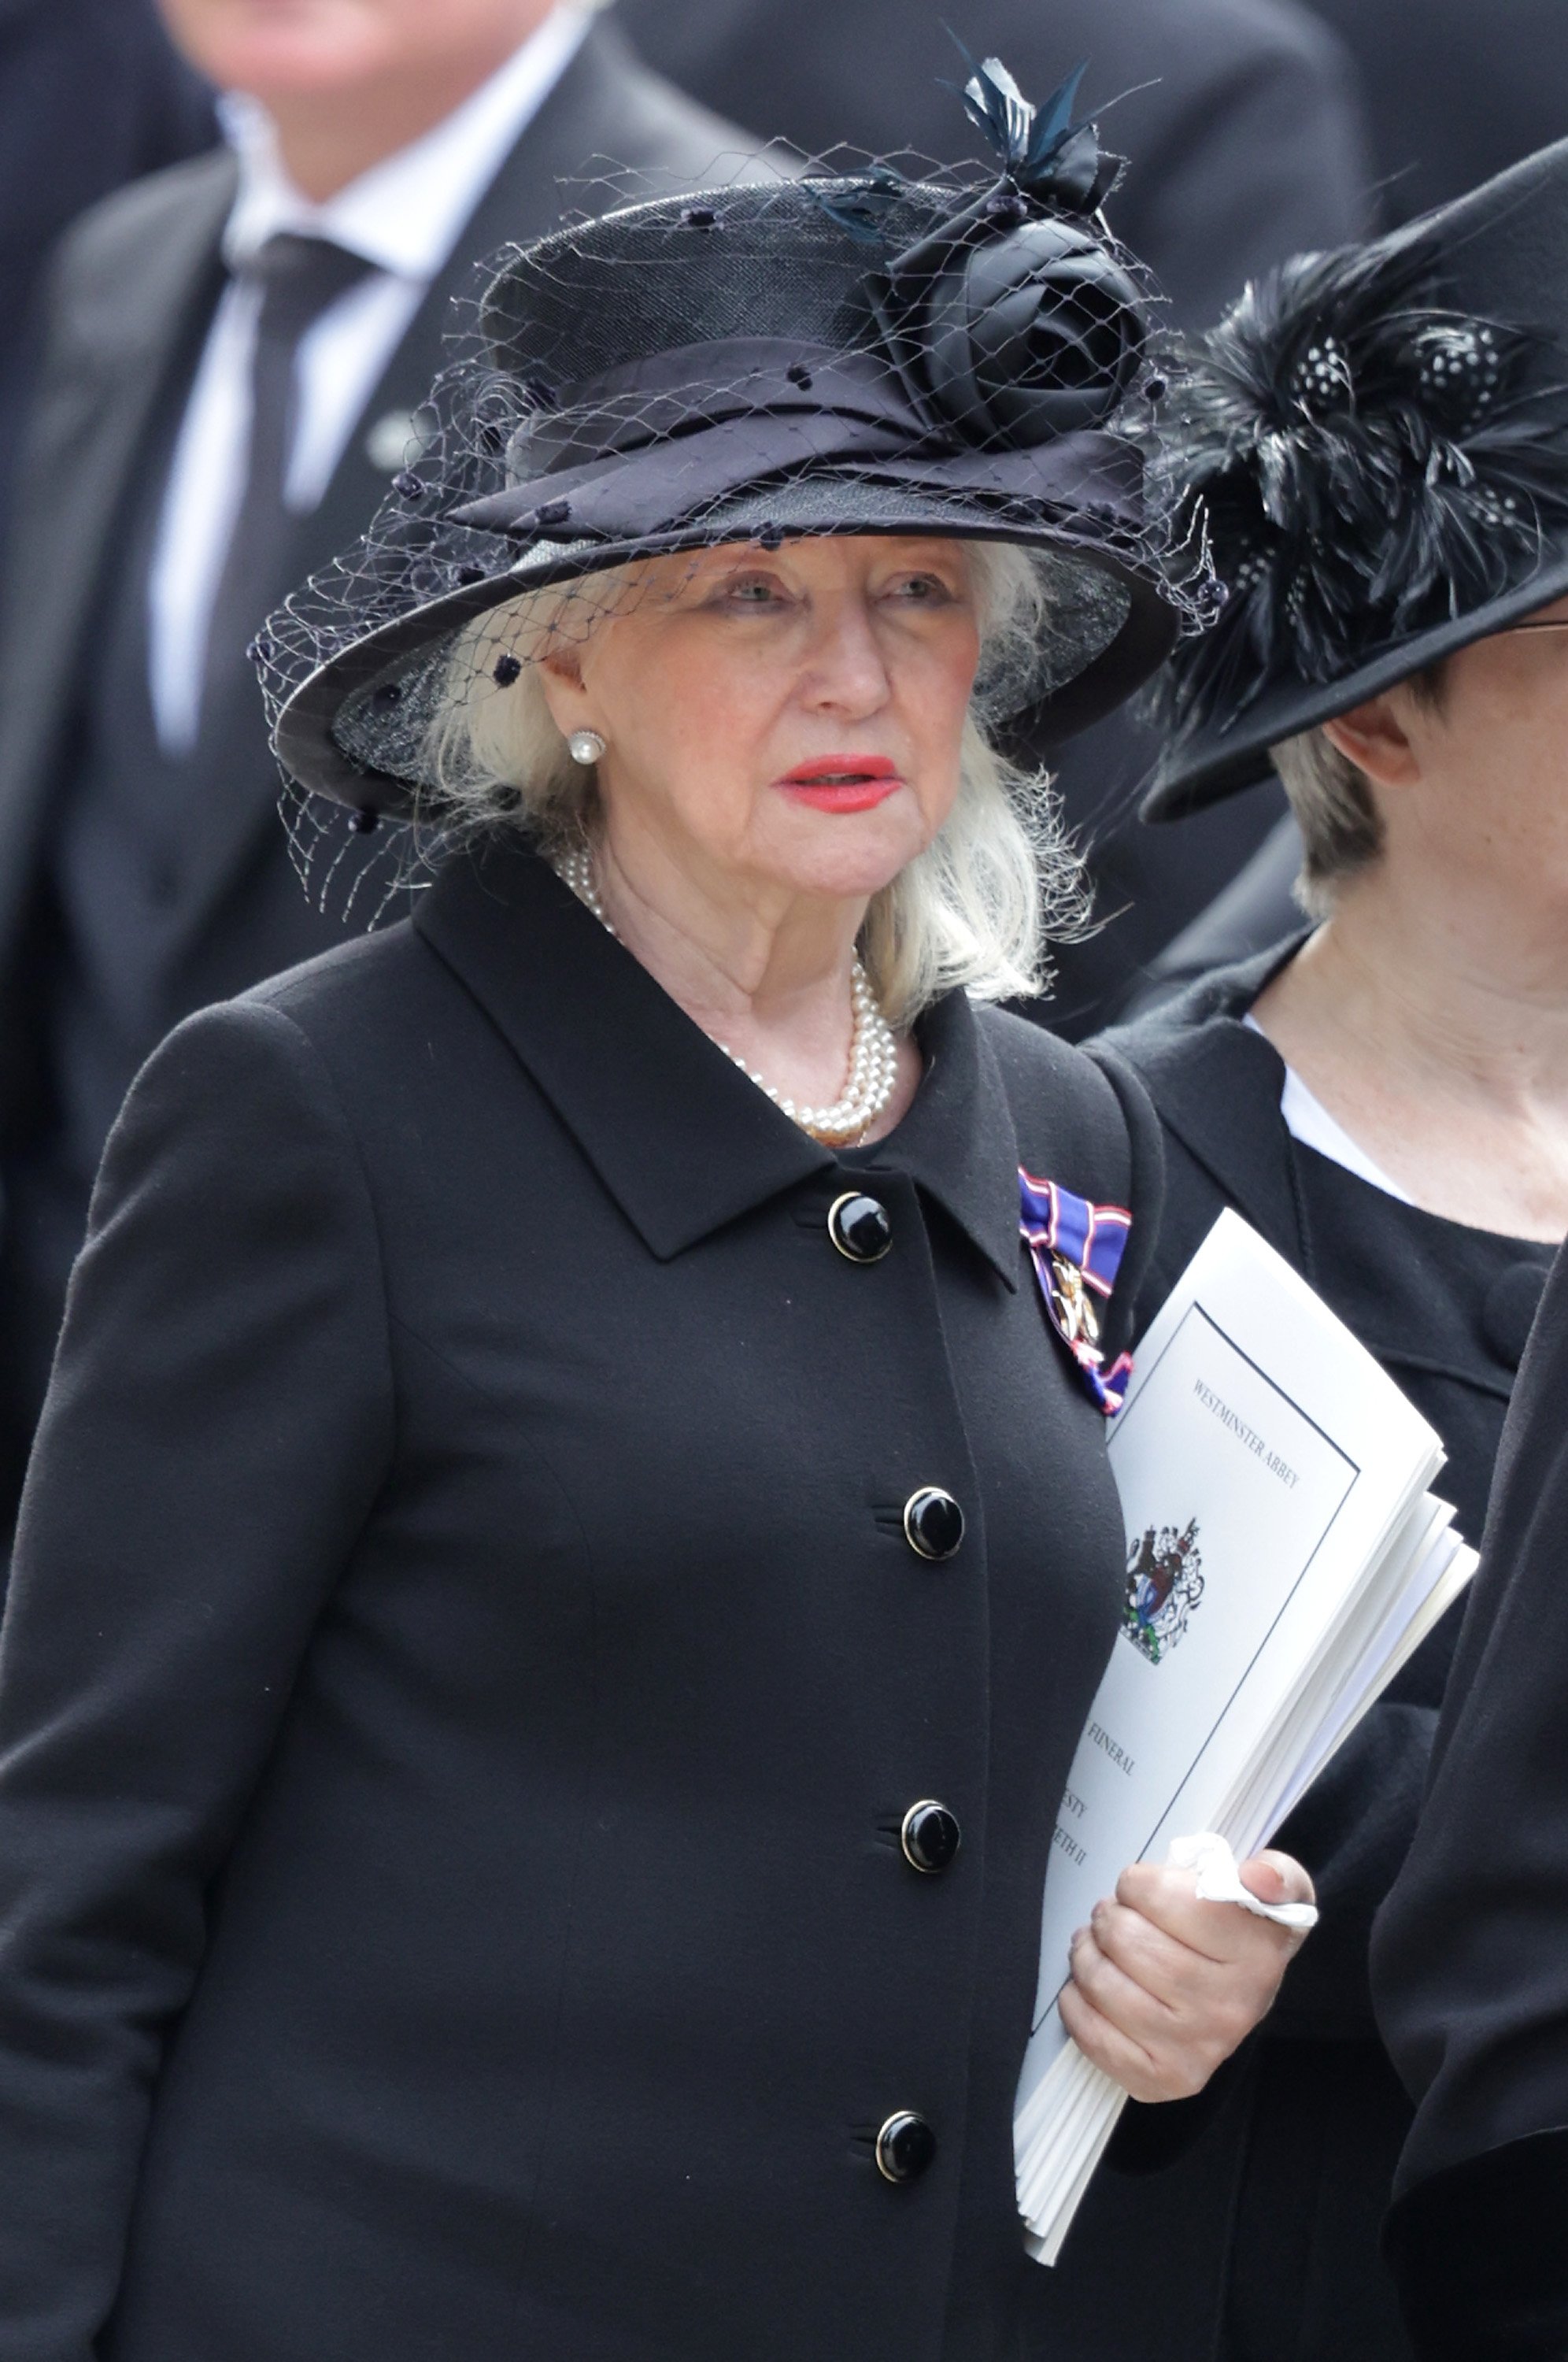 Angela Kelly during the state funeral of Queen Elizabeth II at Westminster Abbey on September 19, 2022 in London, England ┃Source: Getty Images